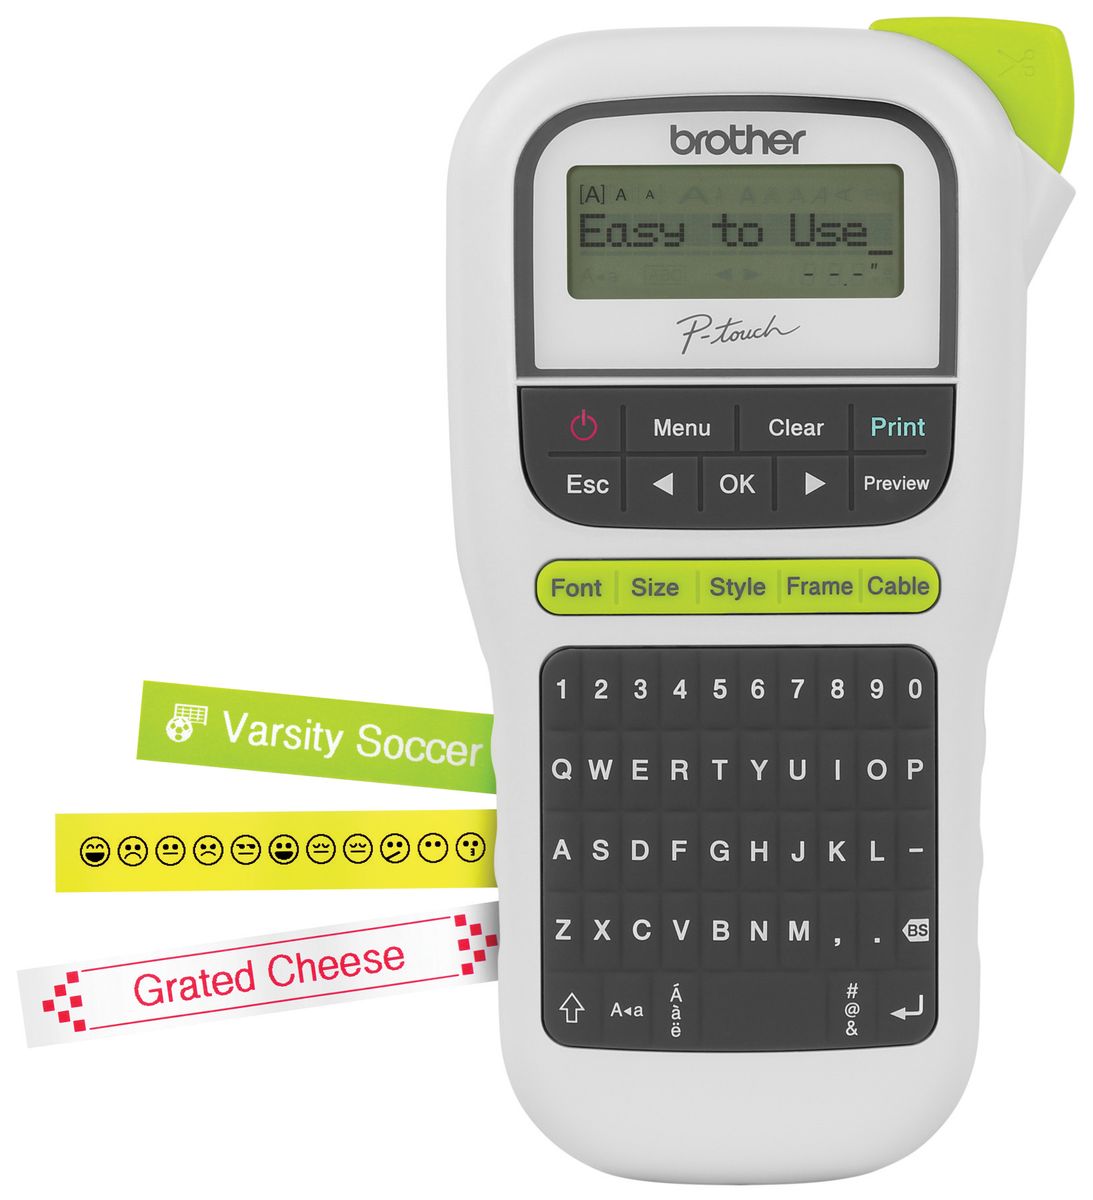 Brother P-touch H110 Label Printer - Grey | Buy Online in South Africa